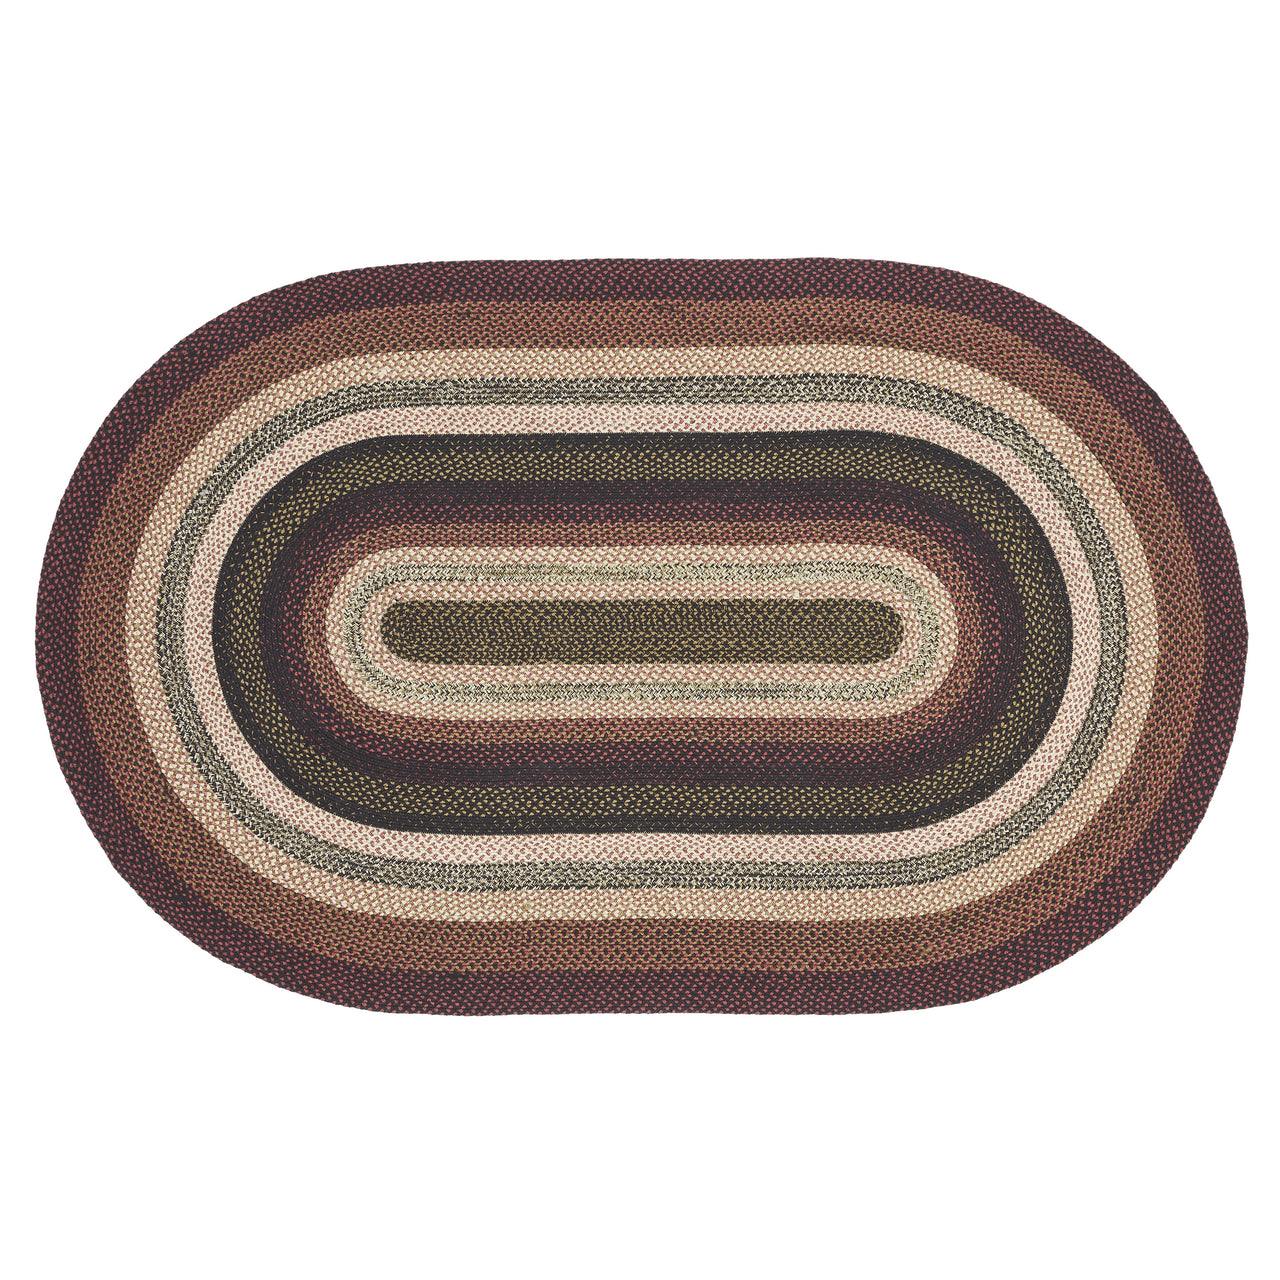 Beckham Jute Braided Rug Oval with Rug Pad 5'x8' VHC Brands